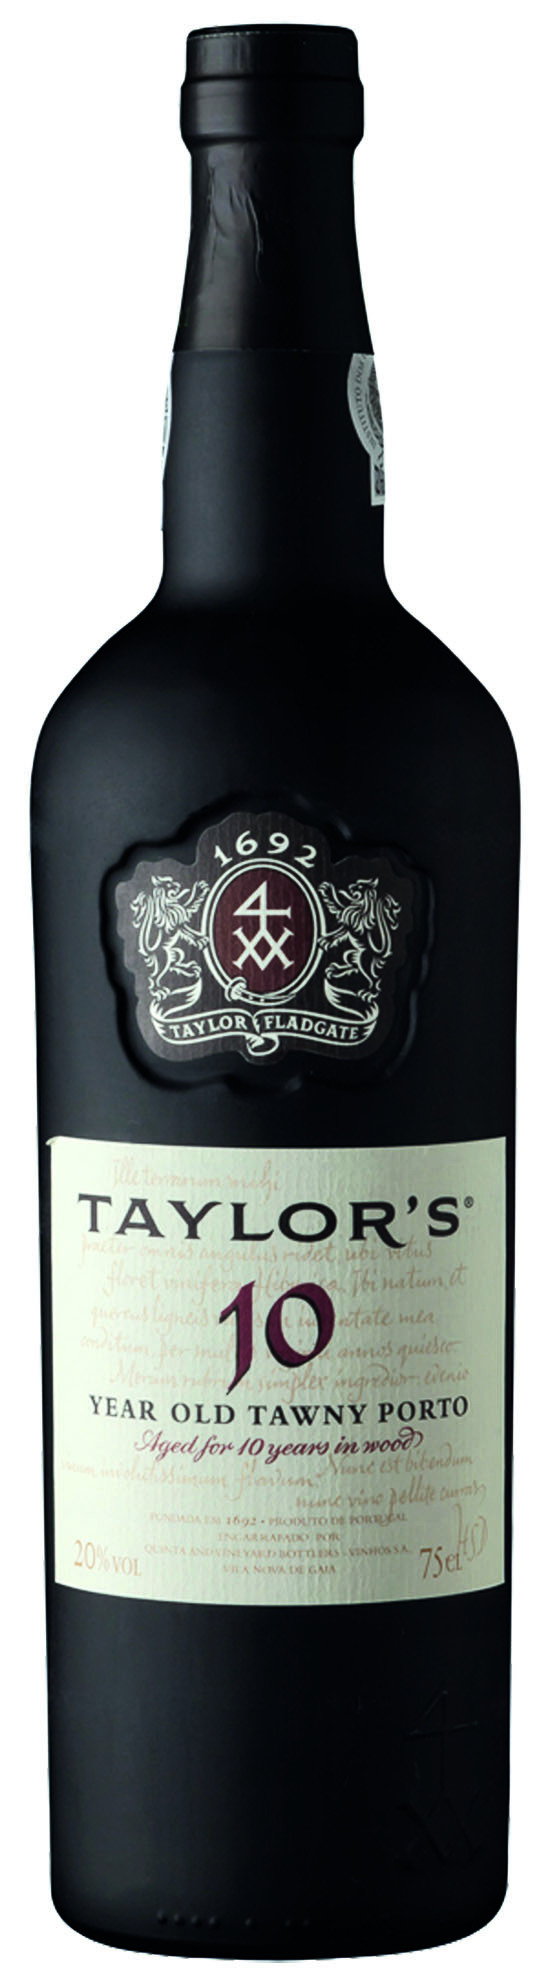 Taylor's Tawny 10 years 20 % 0.75L